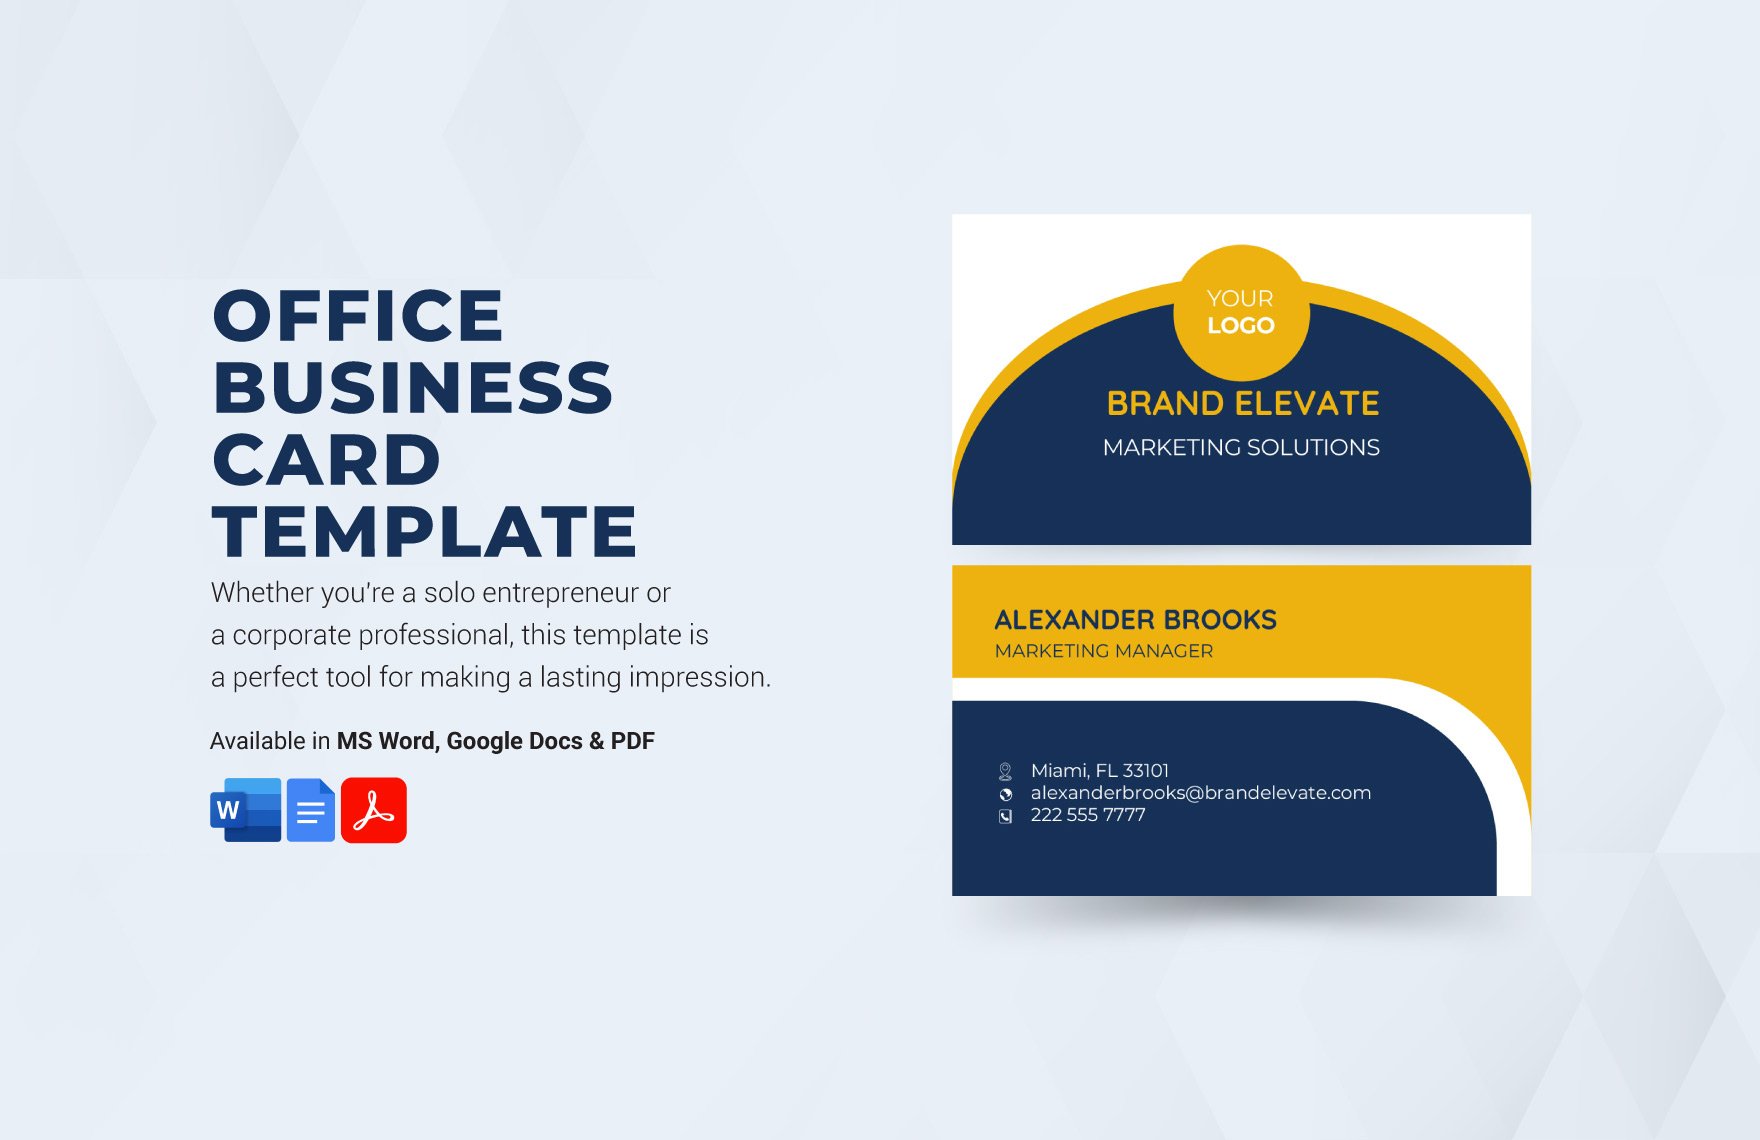 Office Depot Business Card Template in Word, Google Docs, PDF